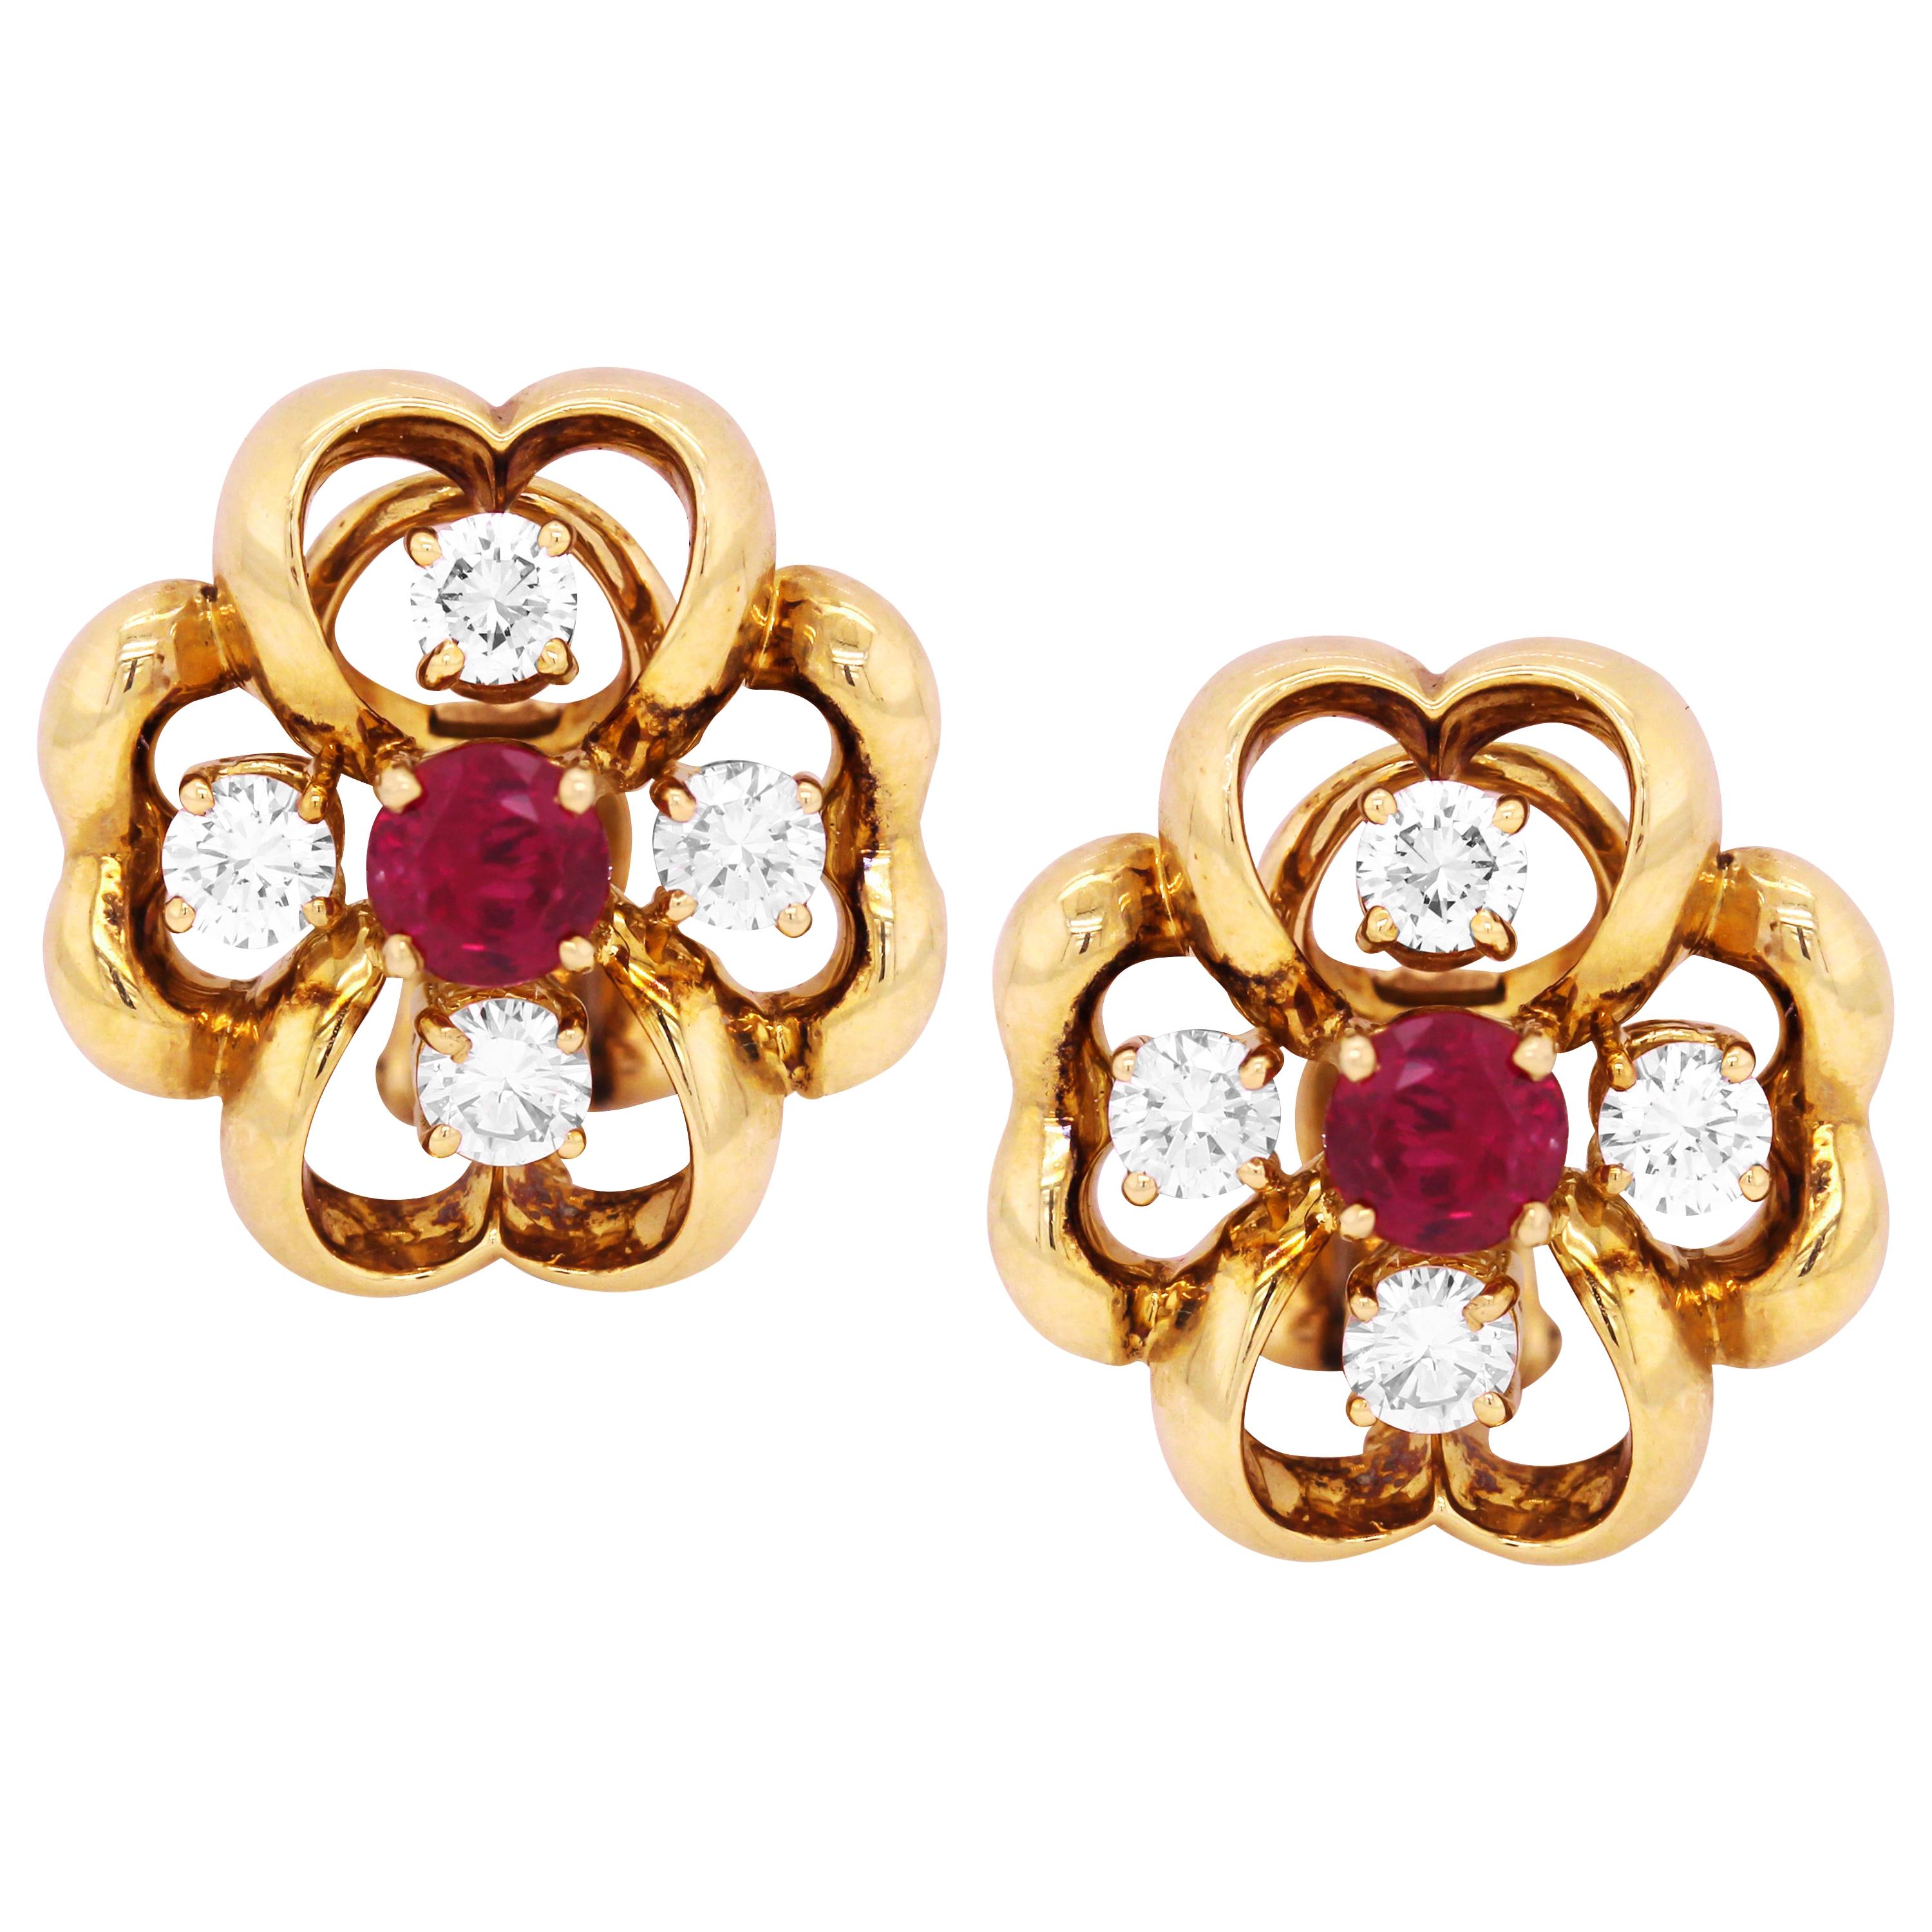 Tiffany & Co. Yellow Gold Earrings with Diamonds and Ruby Centers